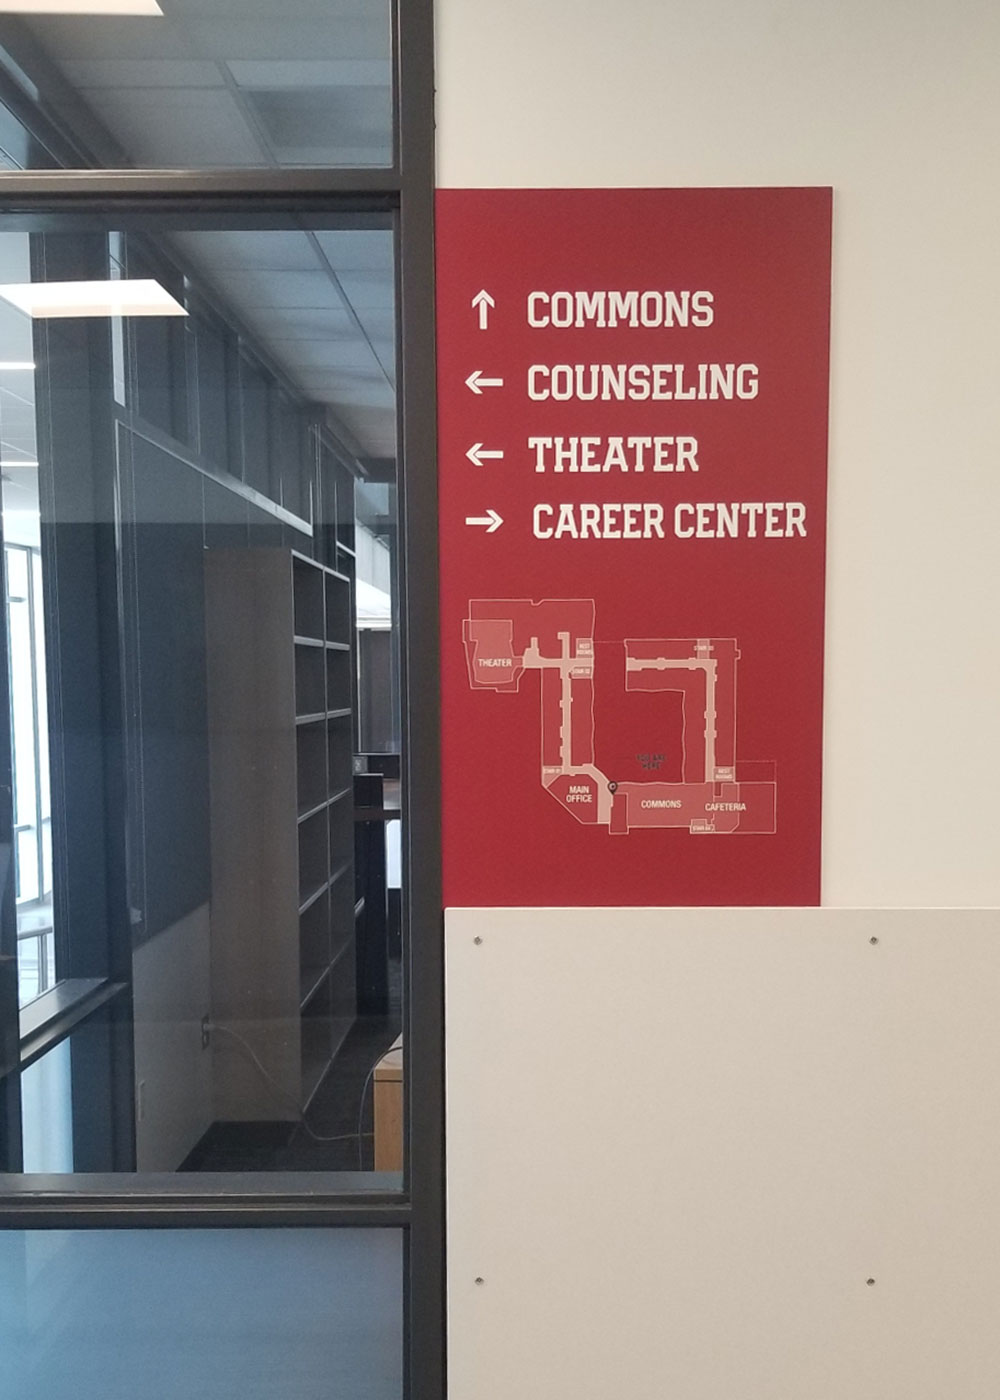 The Juanita High School sign package features a diverse range of interior signage needs - from dimensional to ADA/regulatory to flat panel wayfinding.